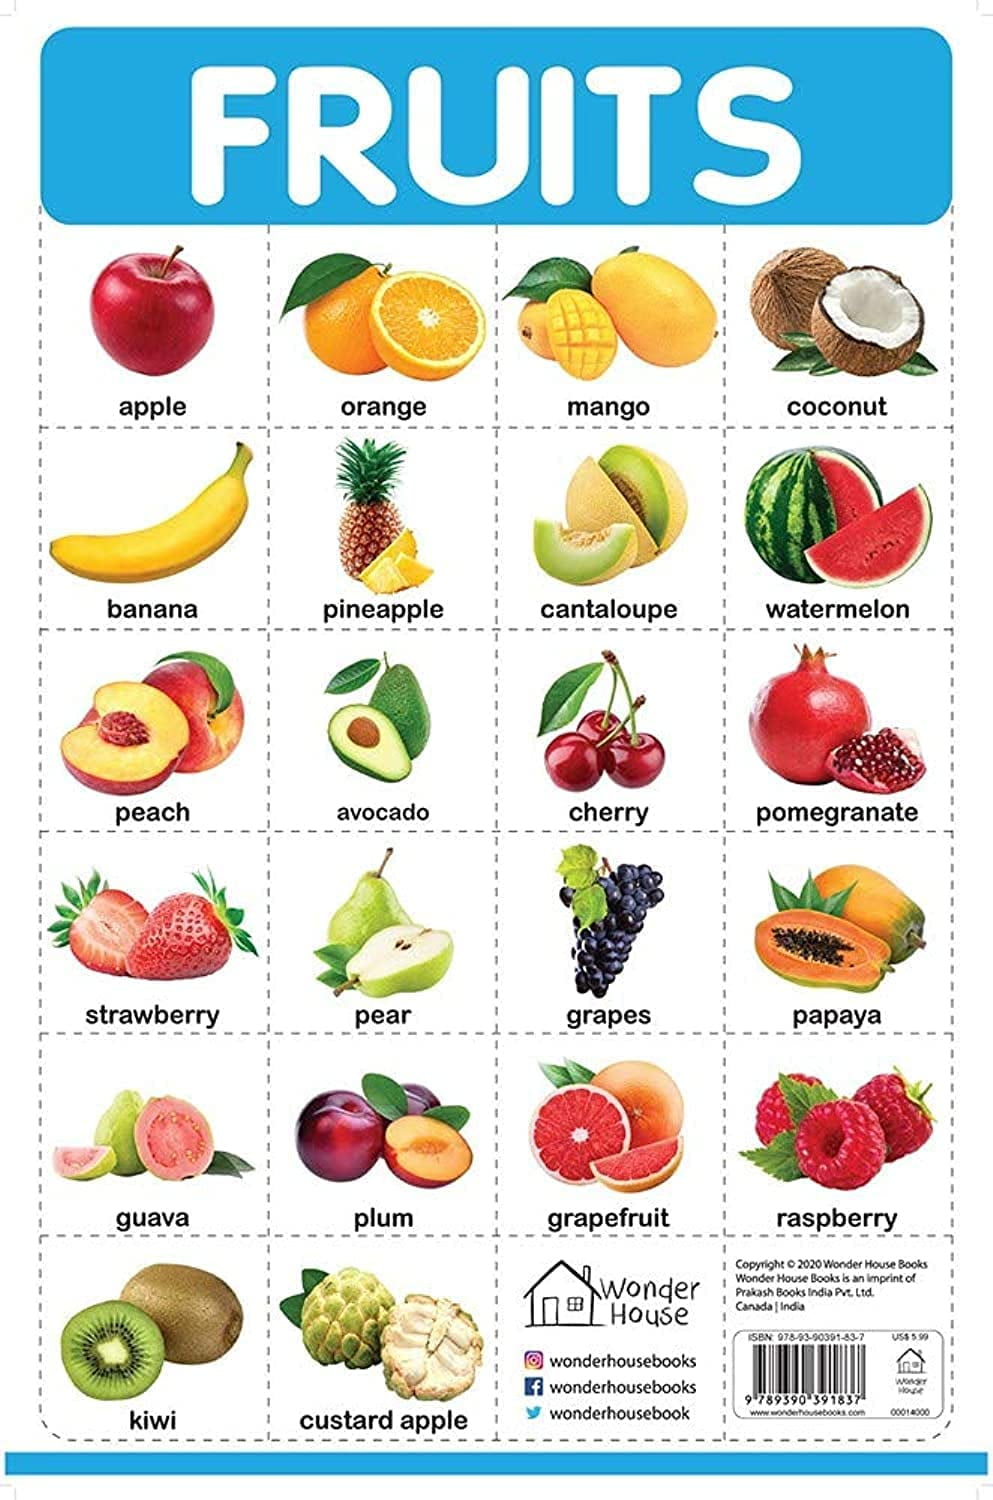 Fruits - My First Early Learning Wall Chart: For Preschool ...